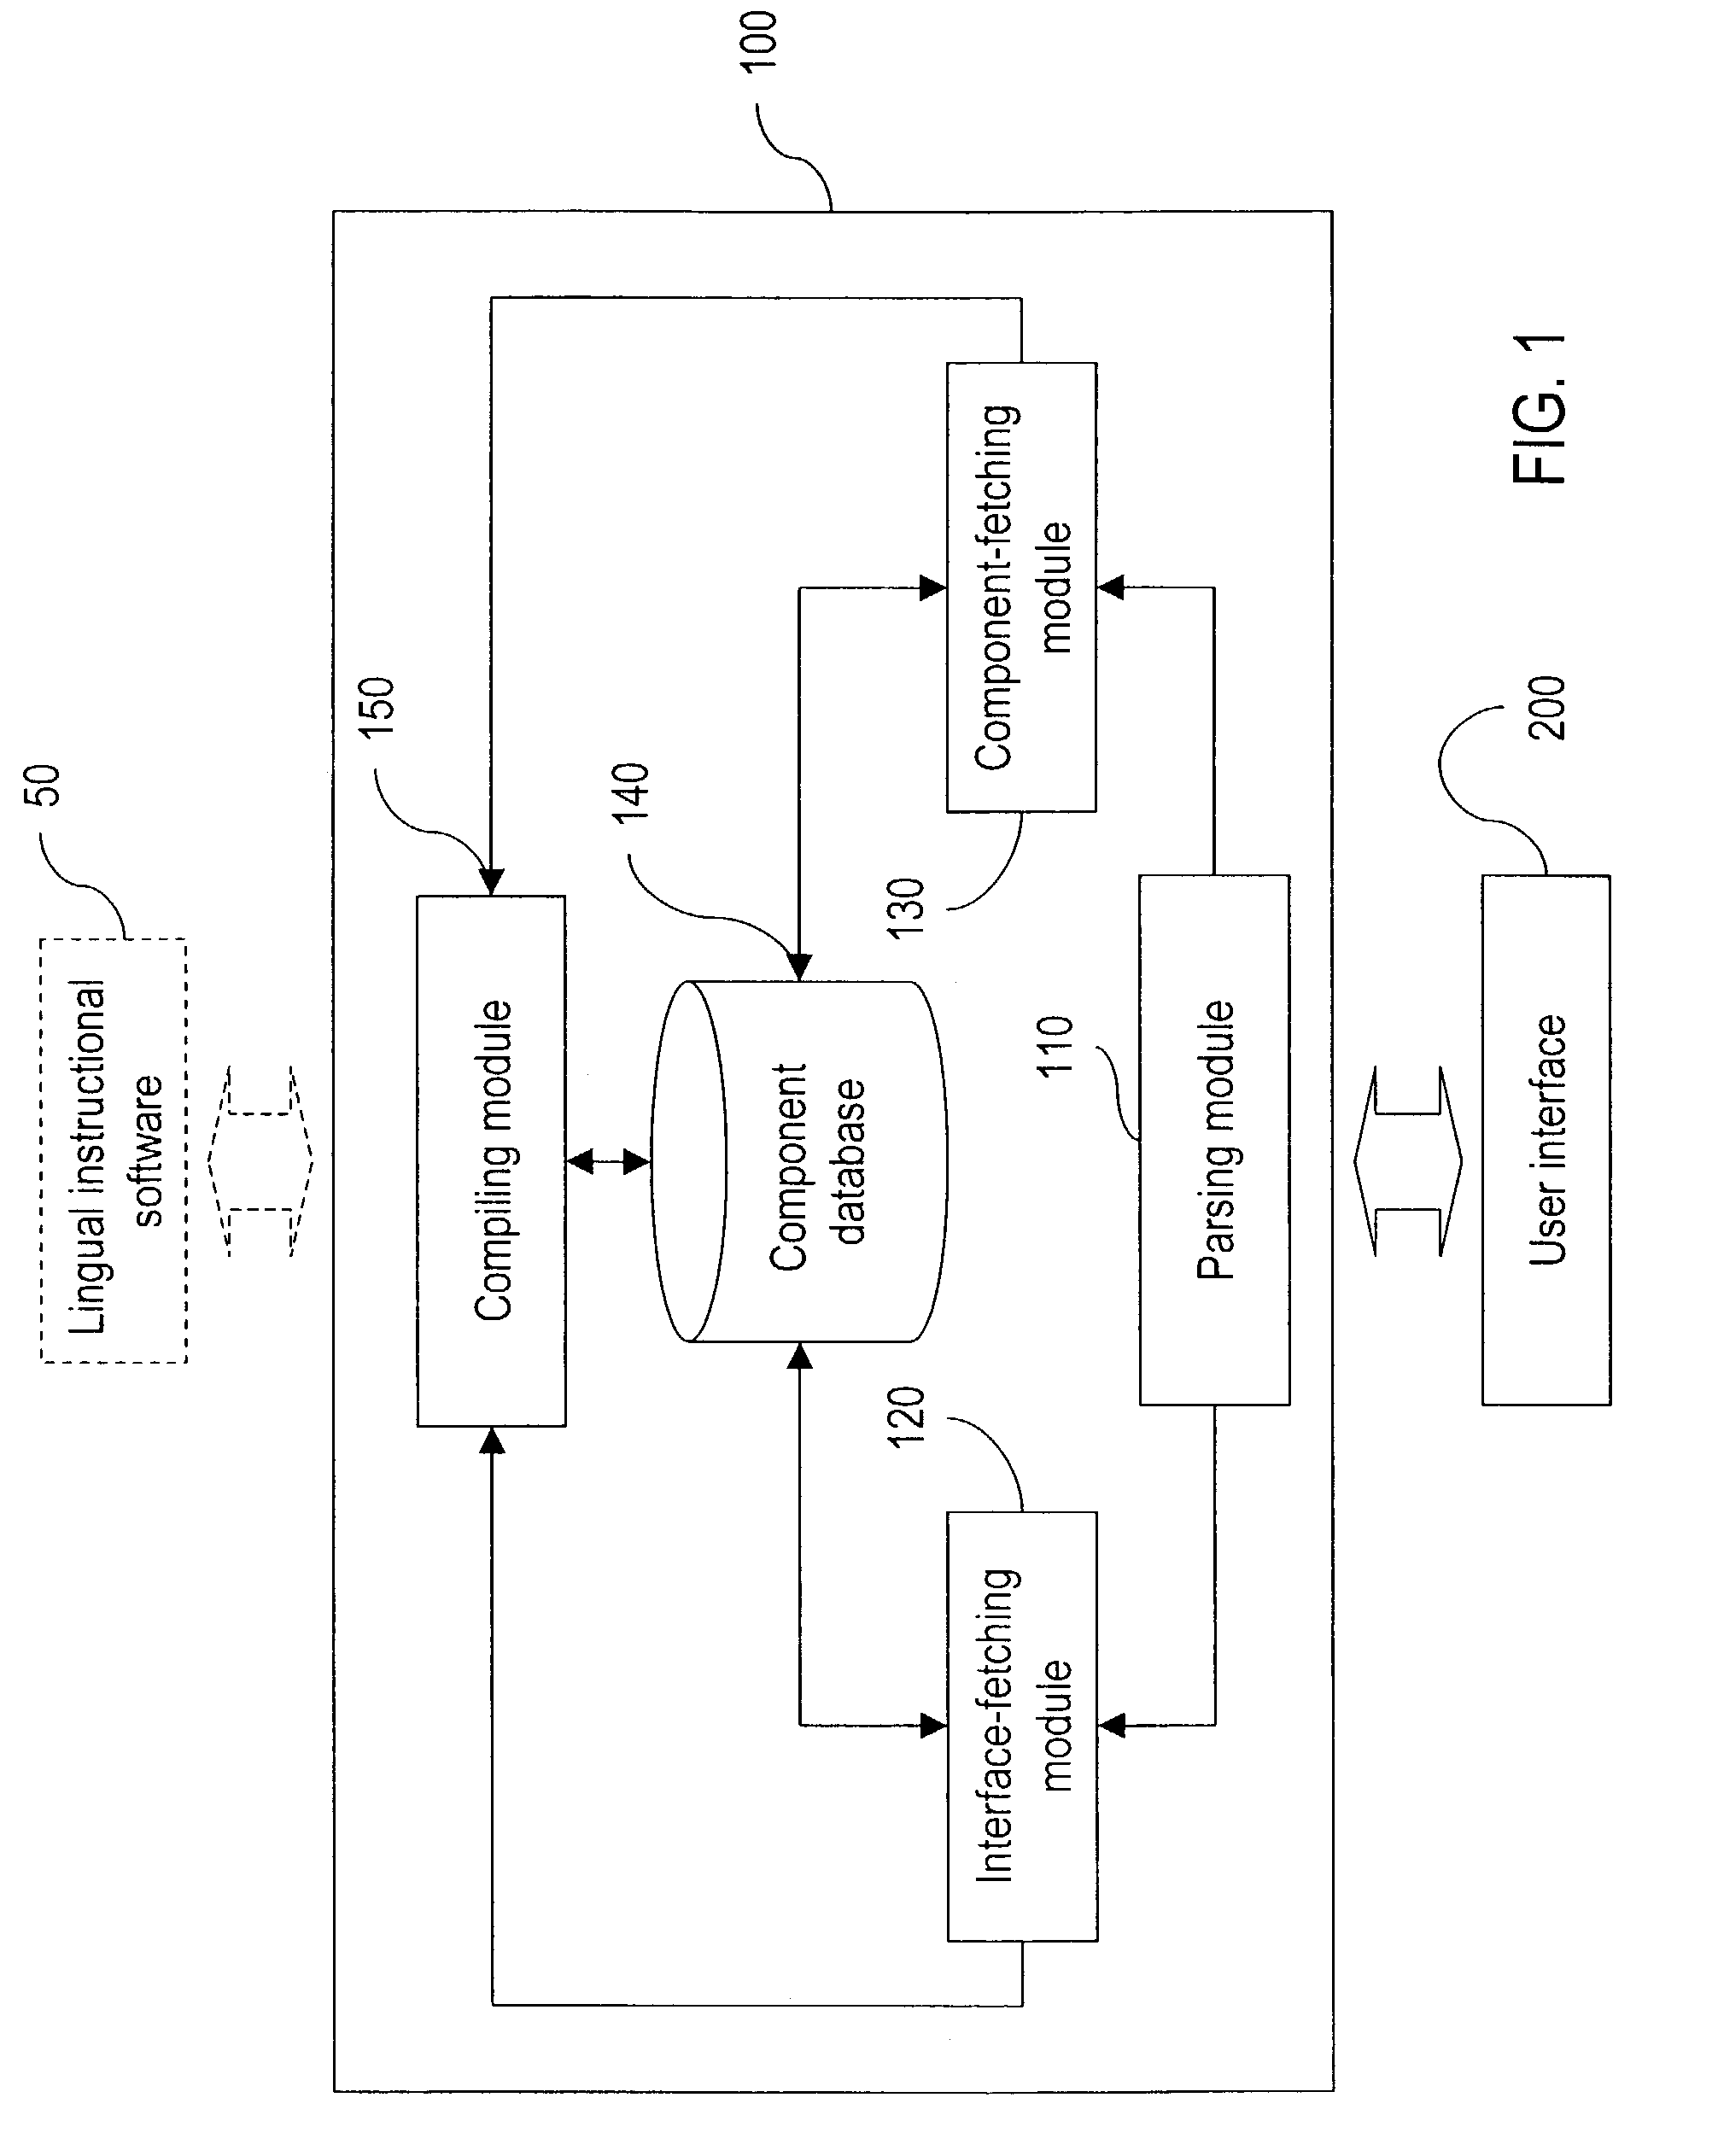 System and method for composing a multi-lingual instructional software